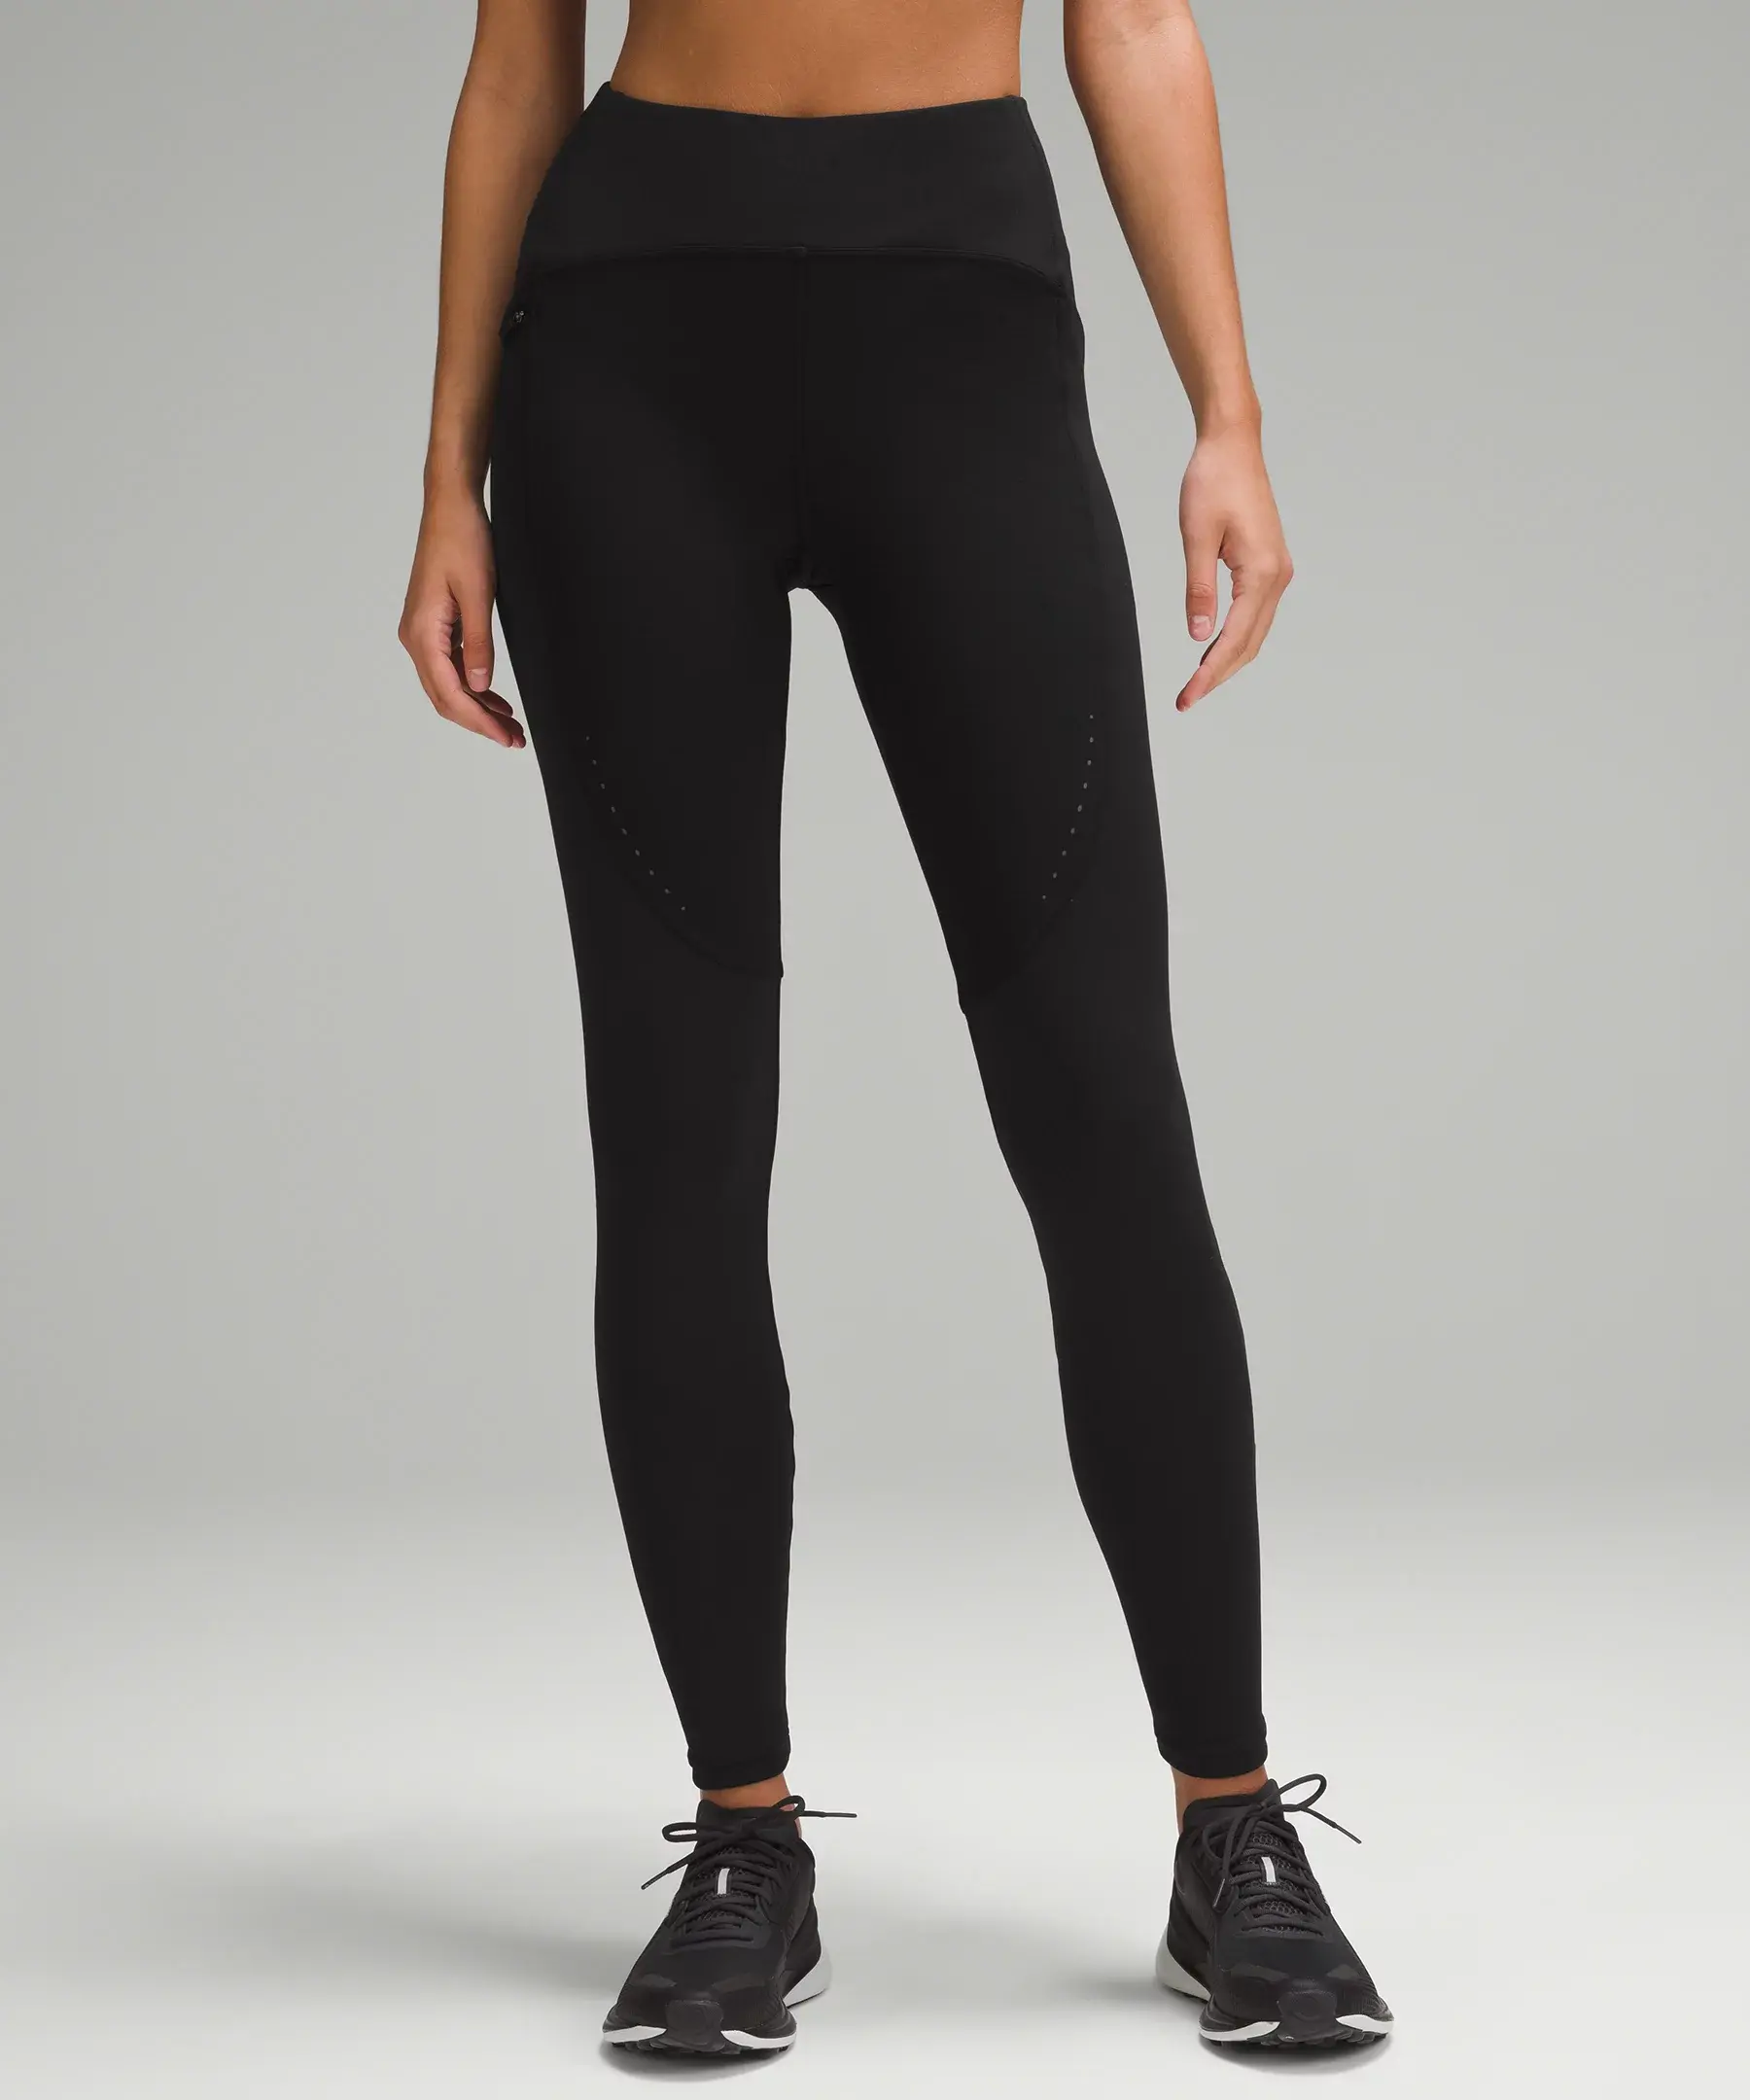 Lululemon Cold Weather High-Rise Running Tight 28". 1